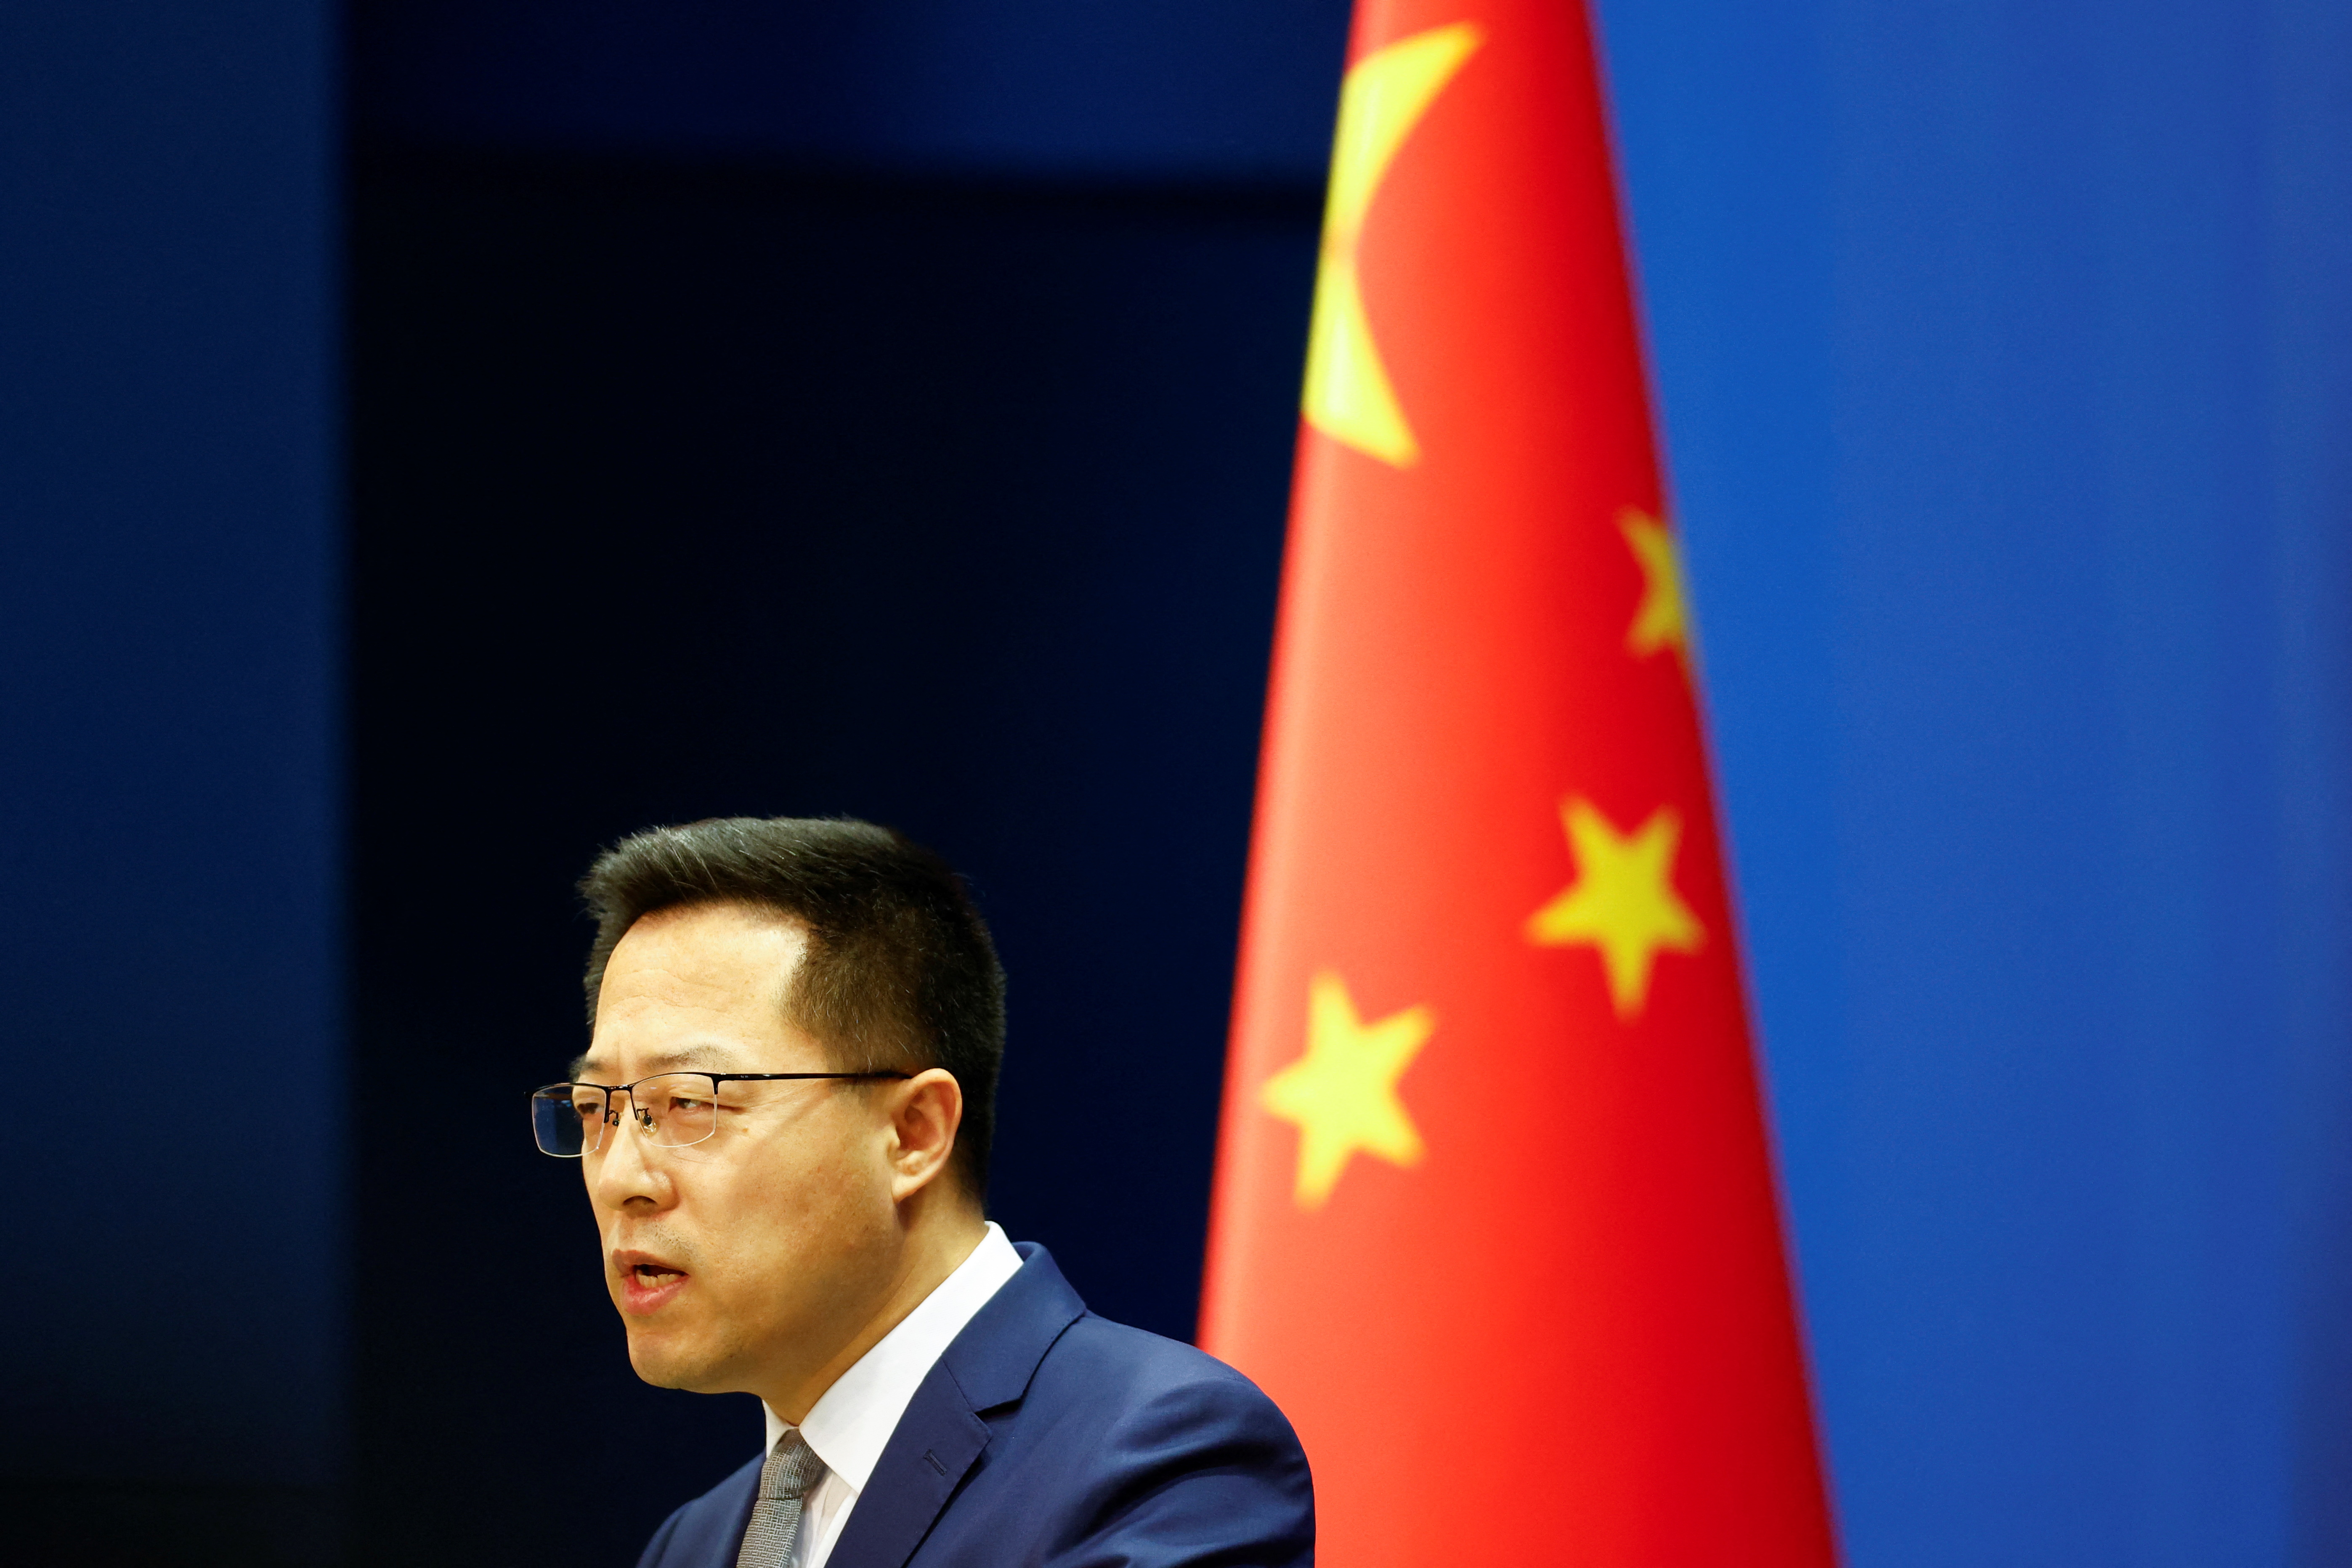 News conference of China's foreign ministry spokesperson Zhao Lijian in Beijing